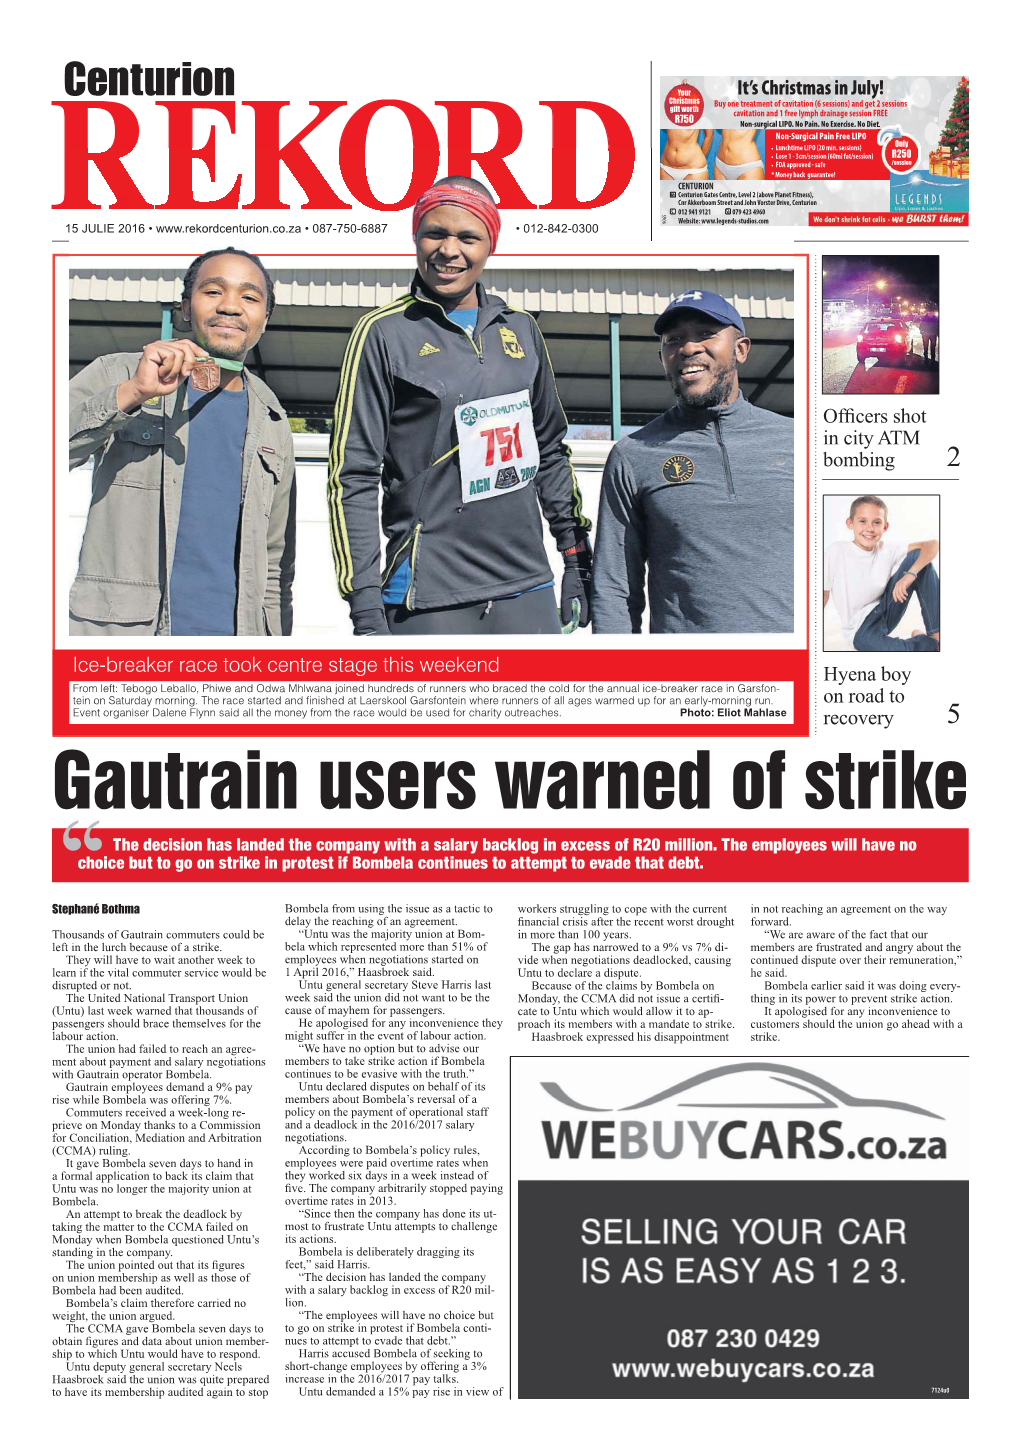 Gautrain Users Warned of Strike the Decision Has Landed the Company with a Salary Backlog in Excess of R20 Million